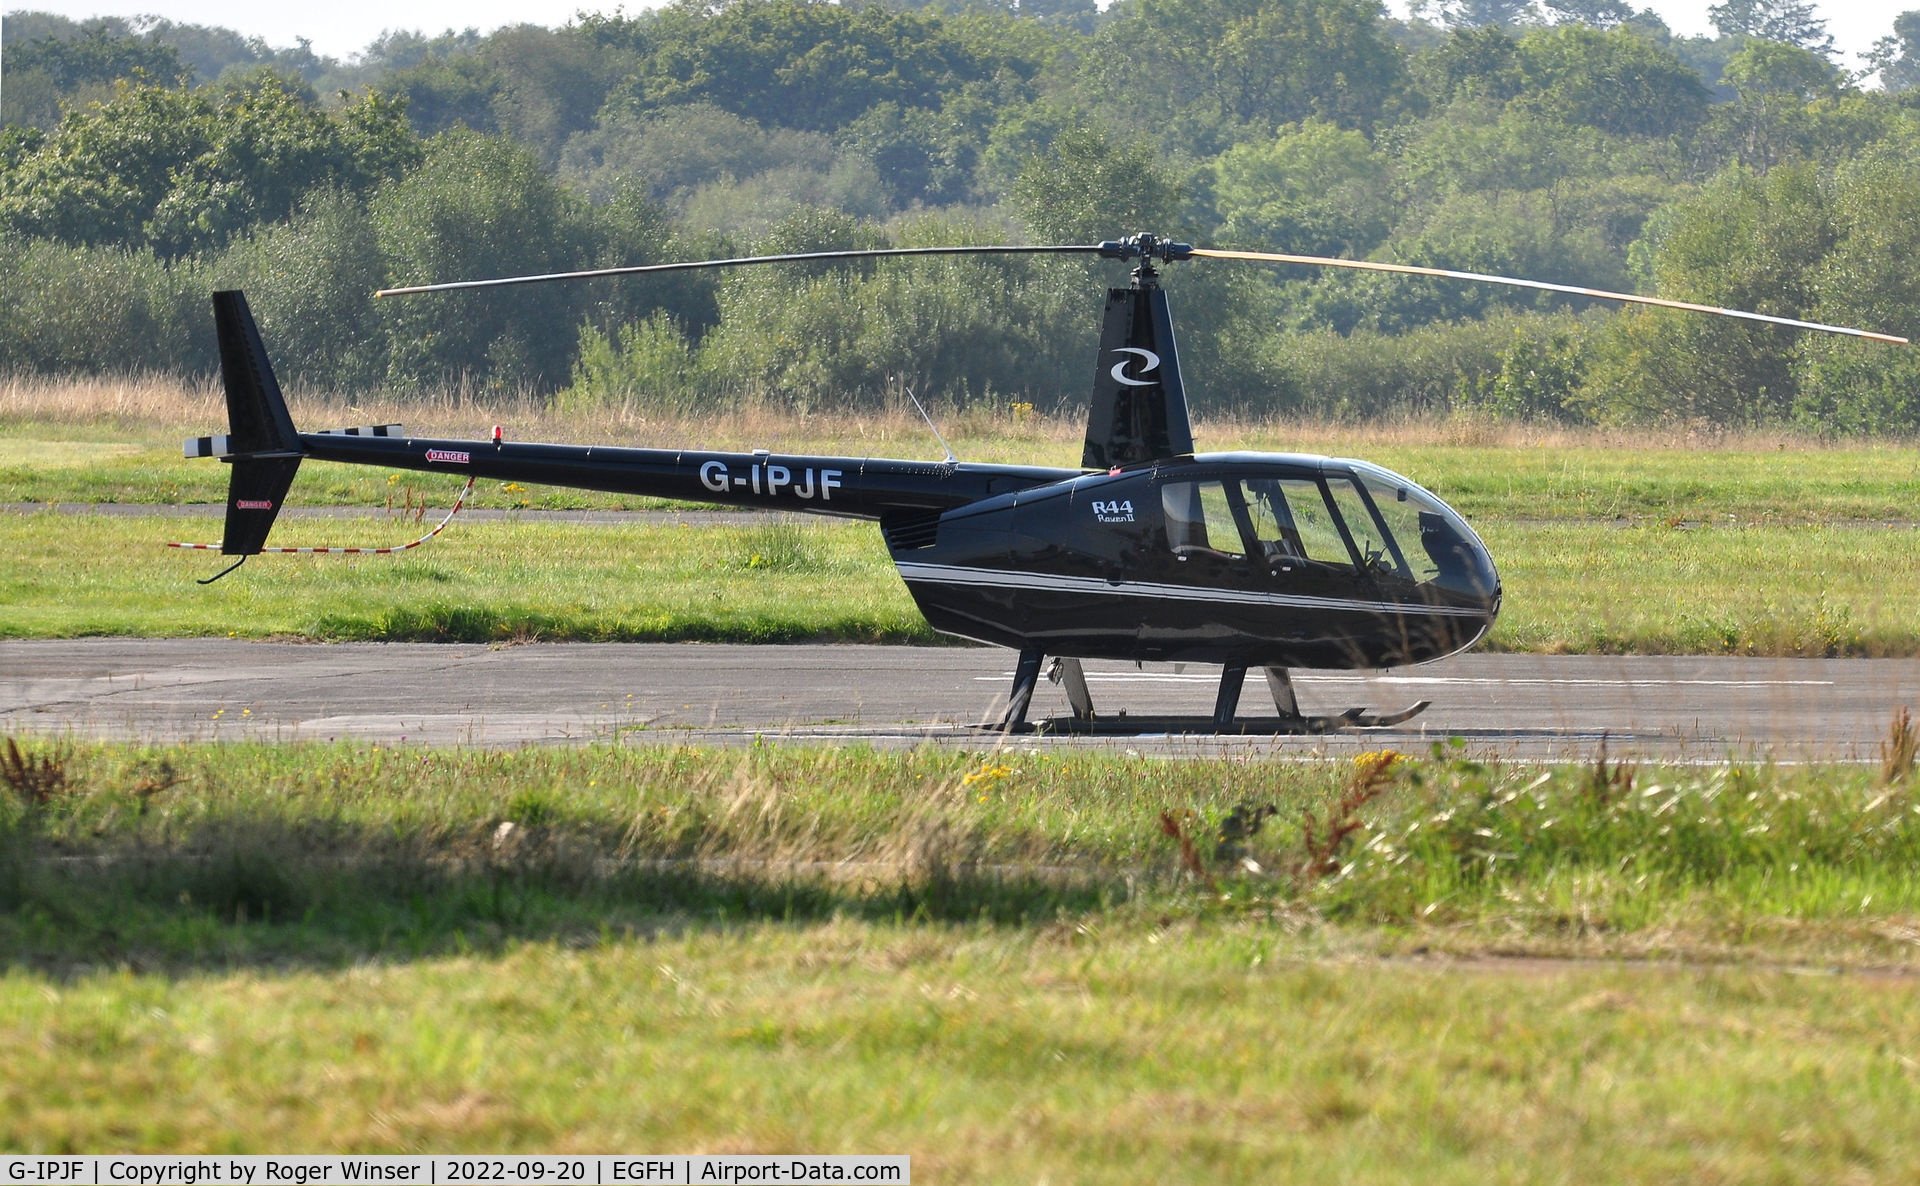 G-IPJF, 2004 Robinson R44 Raven II C/N 10514, Visiting Raven II helicopter operated by Specialist Group International.